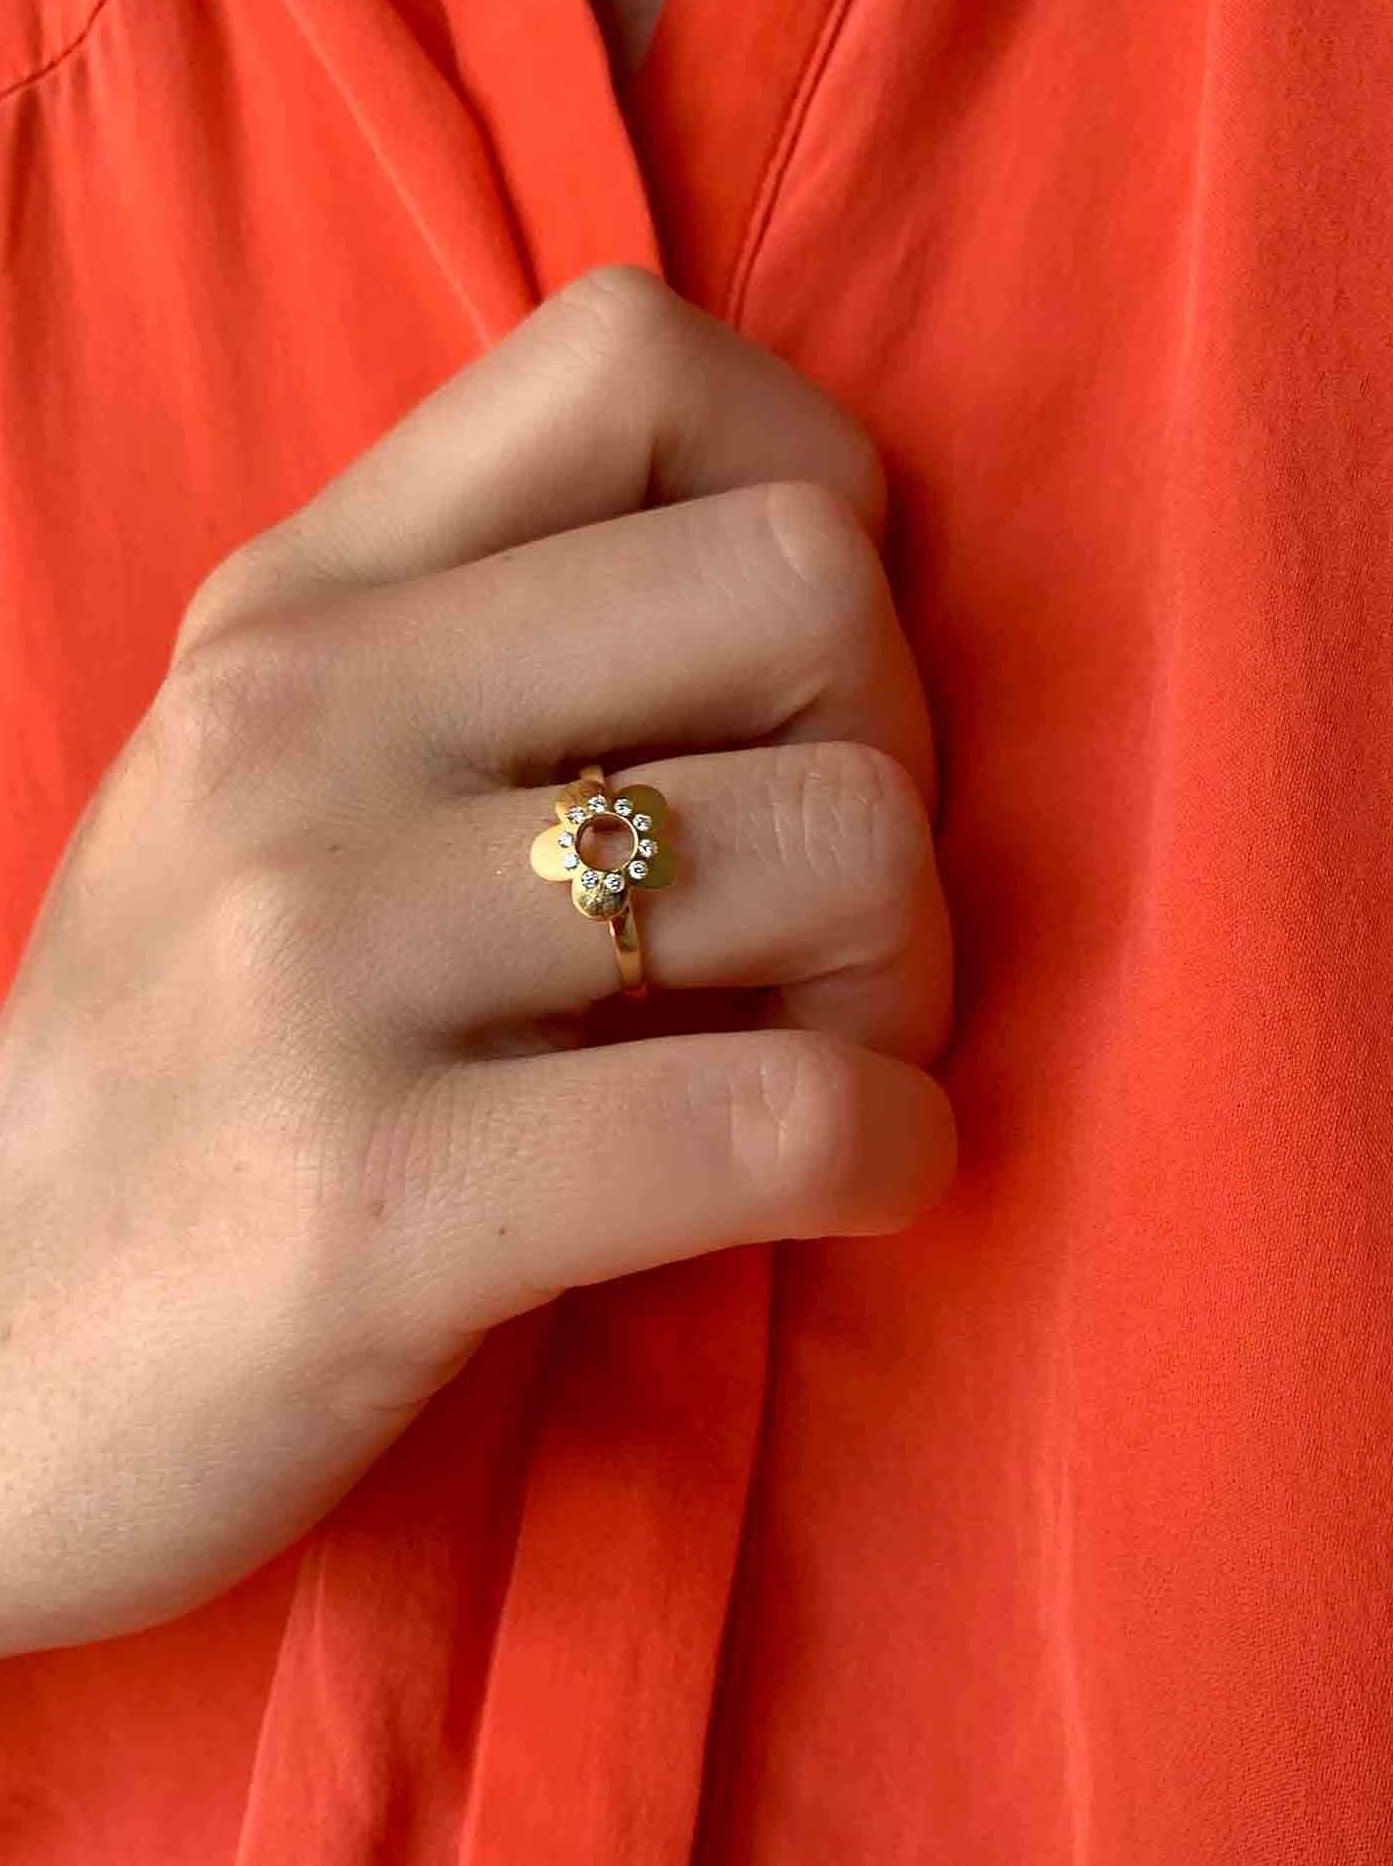 Flower Power - Ring with diamonds